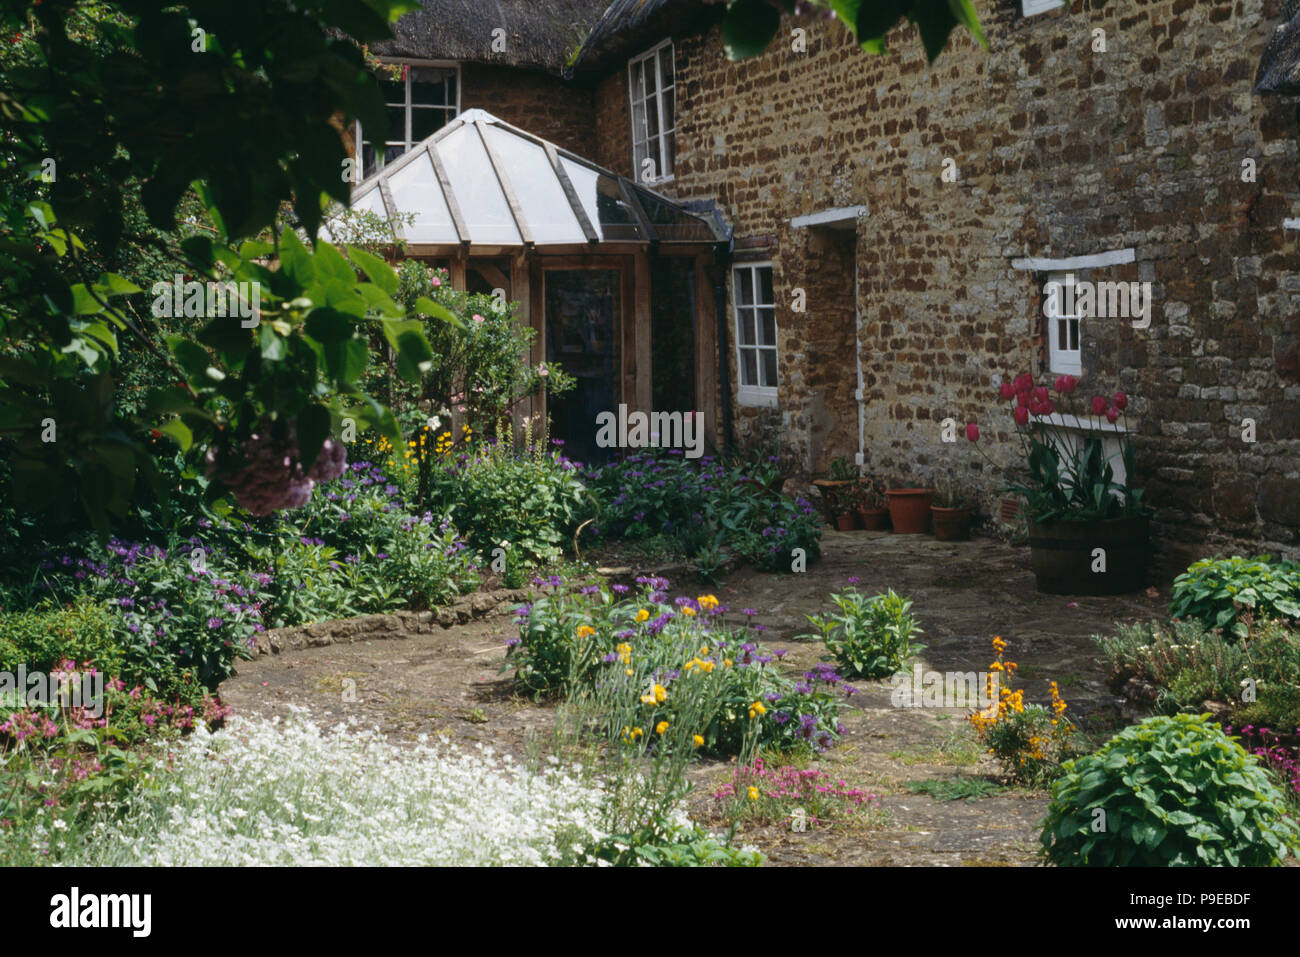 Flowers growing on paving of courtyard in front of old cottage with small conservatory extension Stock Photo